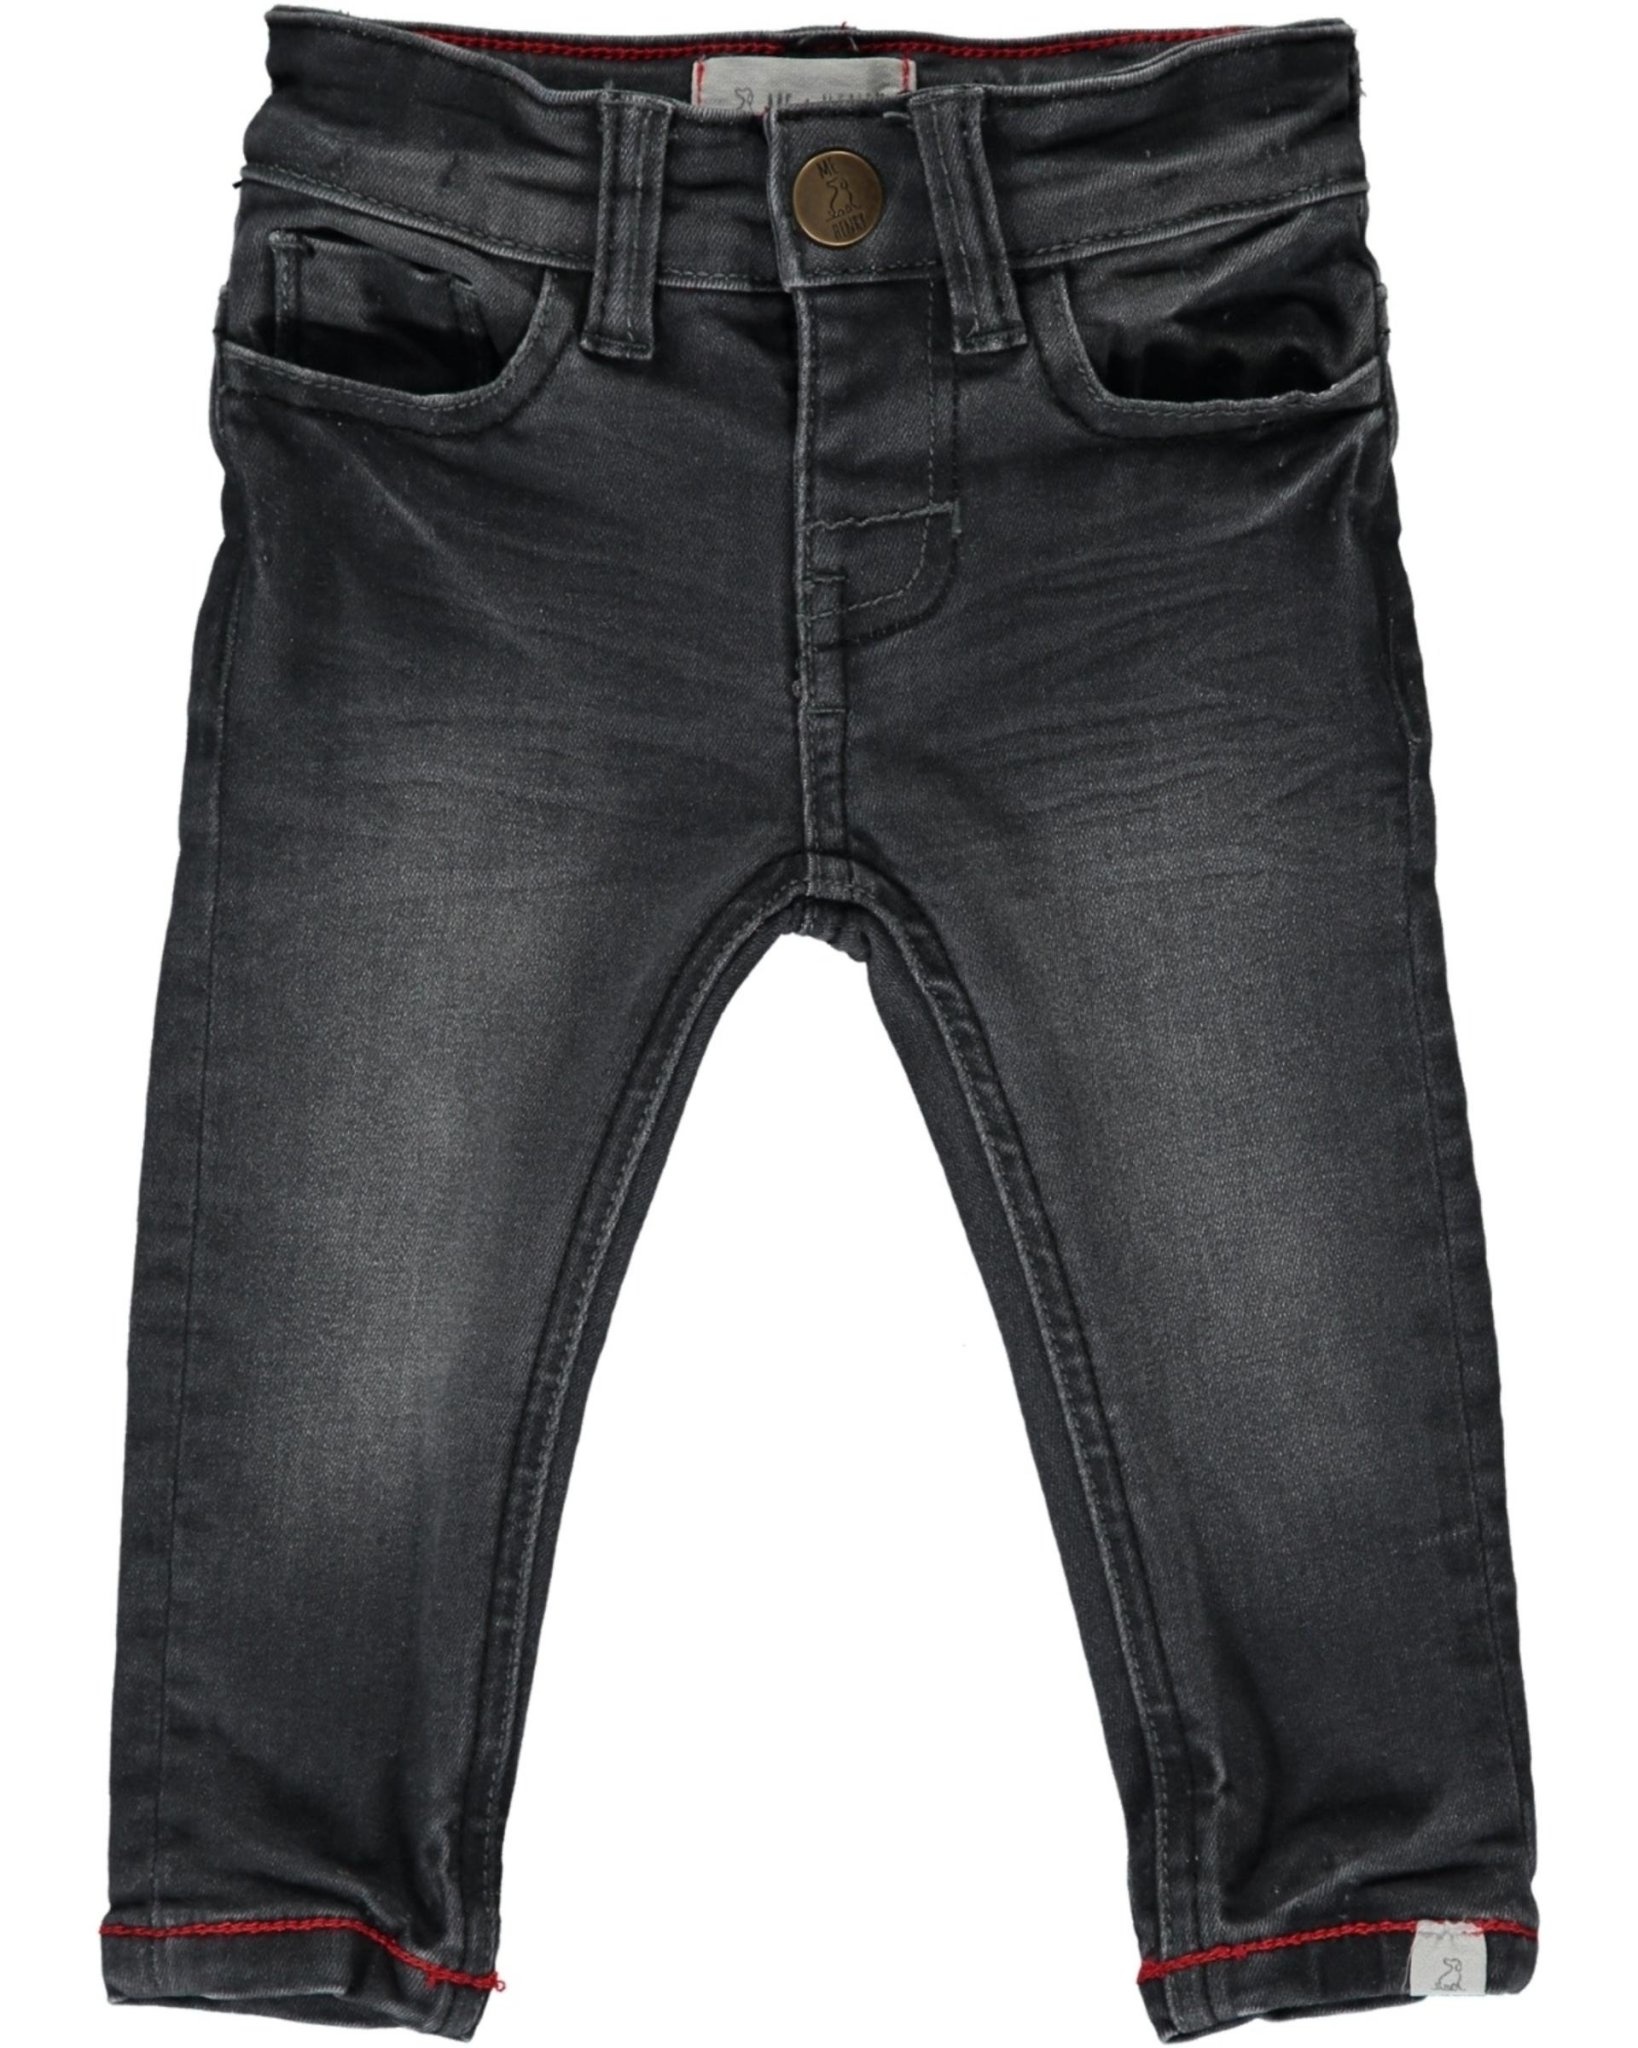 Buy Solid Jeans for Boys with Soft Fabric – Mumkins